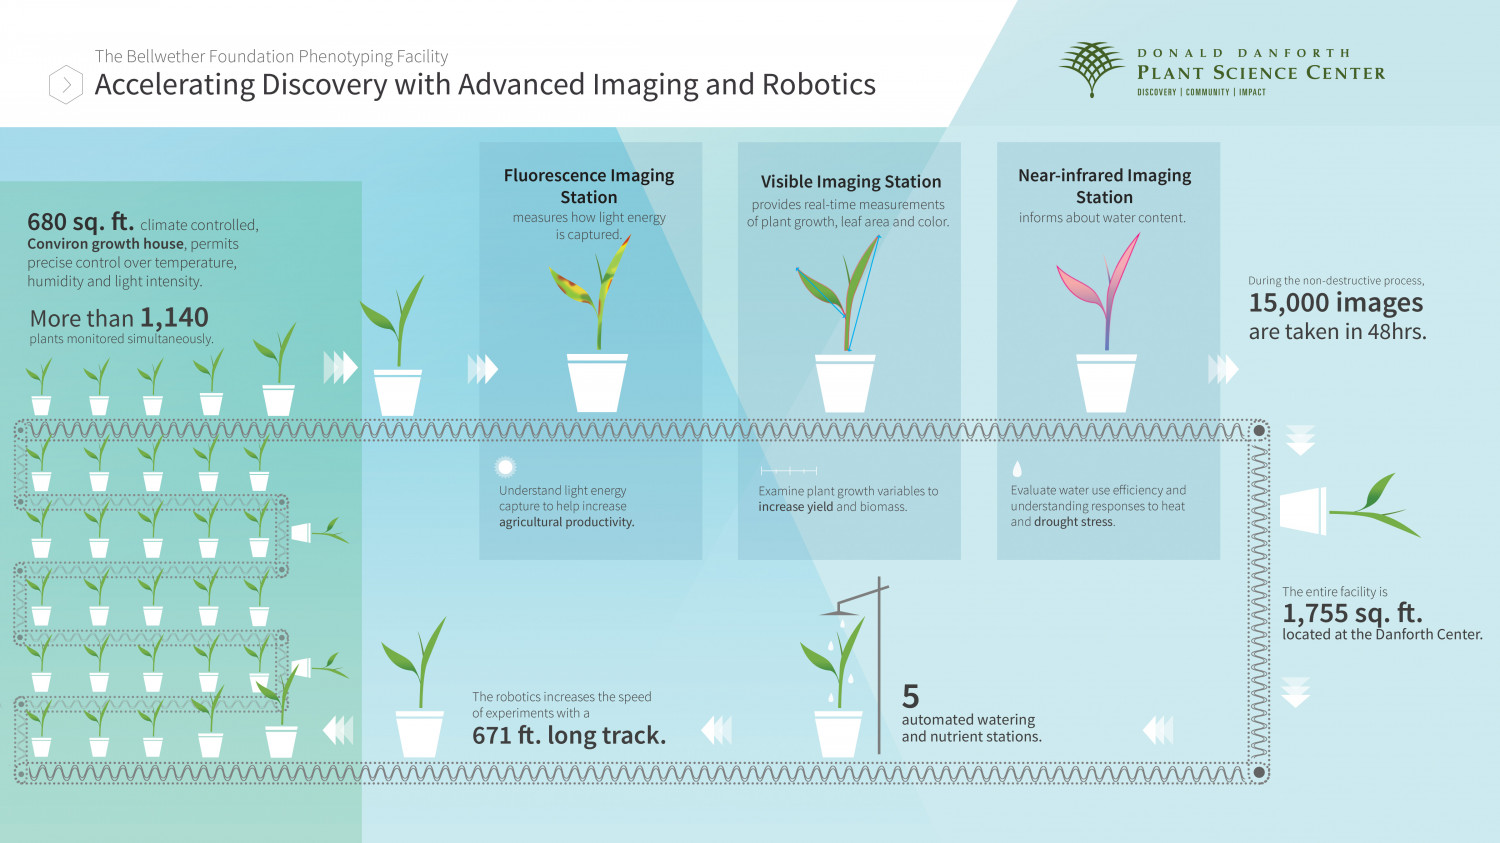 Accelerating Discovery with Advanced Imaging and Robotics  Infographic